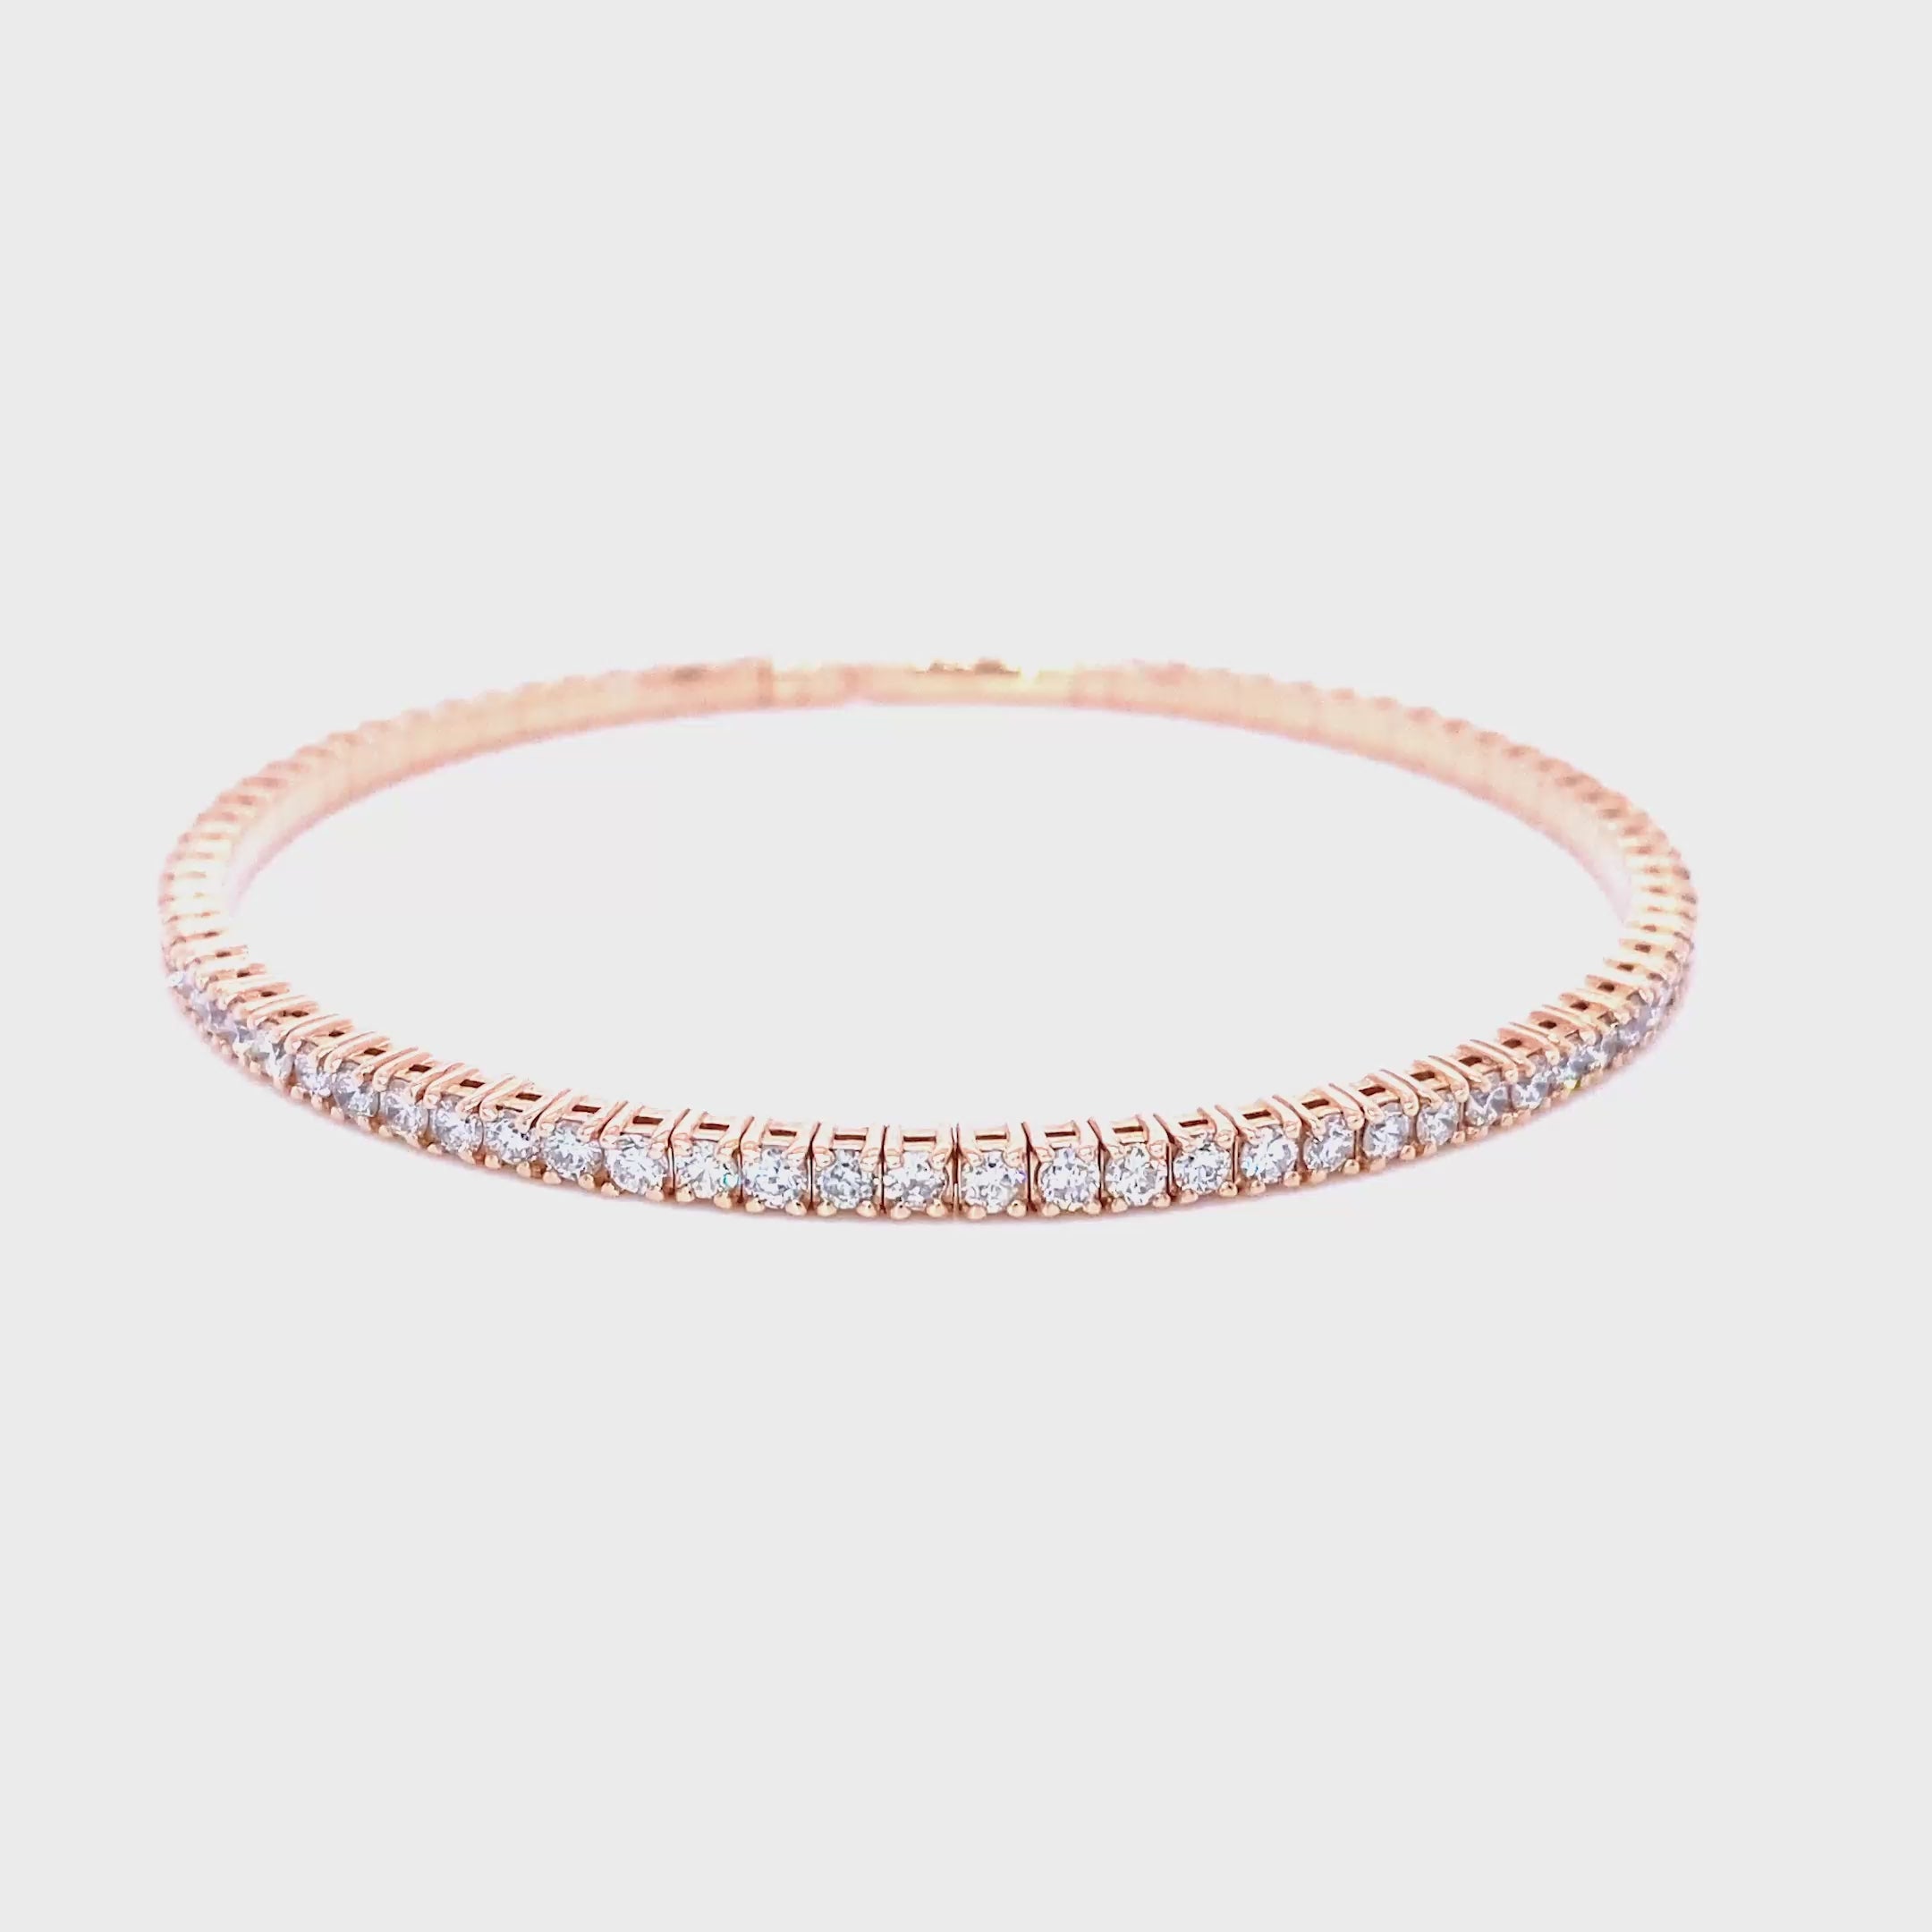 Radiant 2.50 CT Round Cut Diamond Flexible Bangle in 14KT Rose Gold